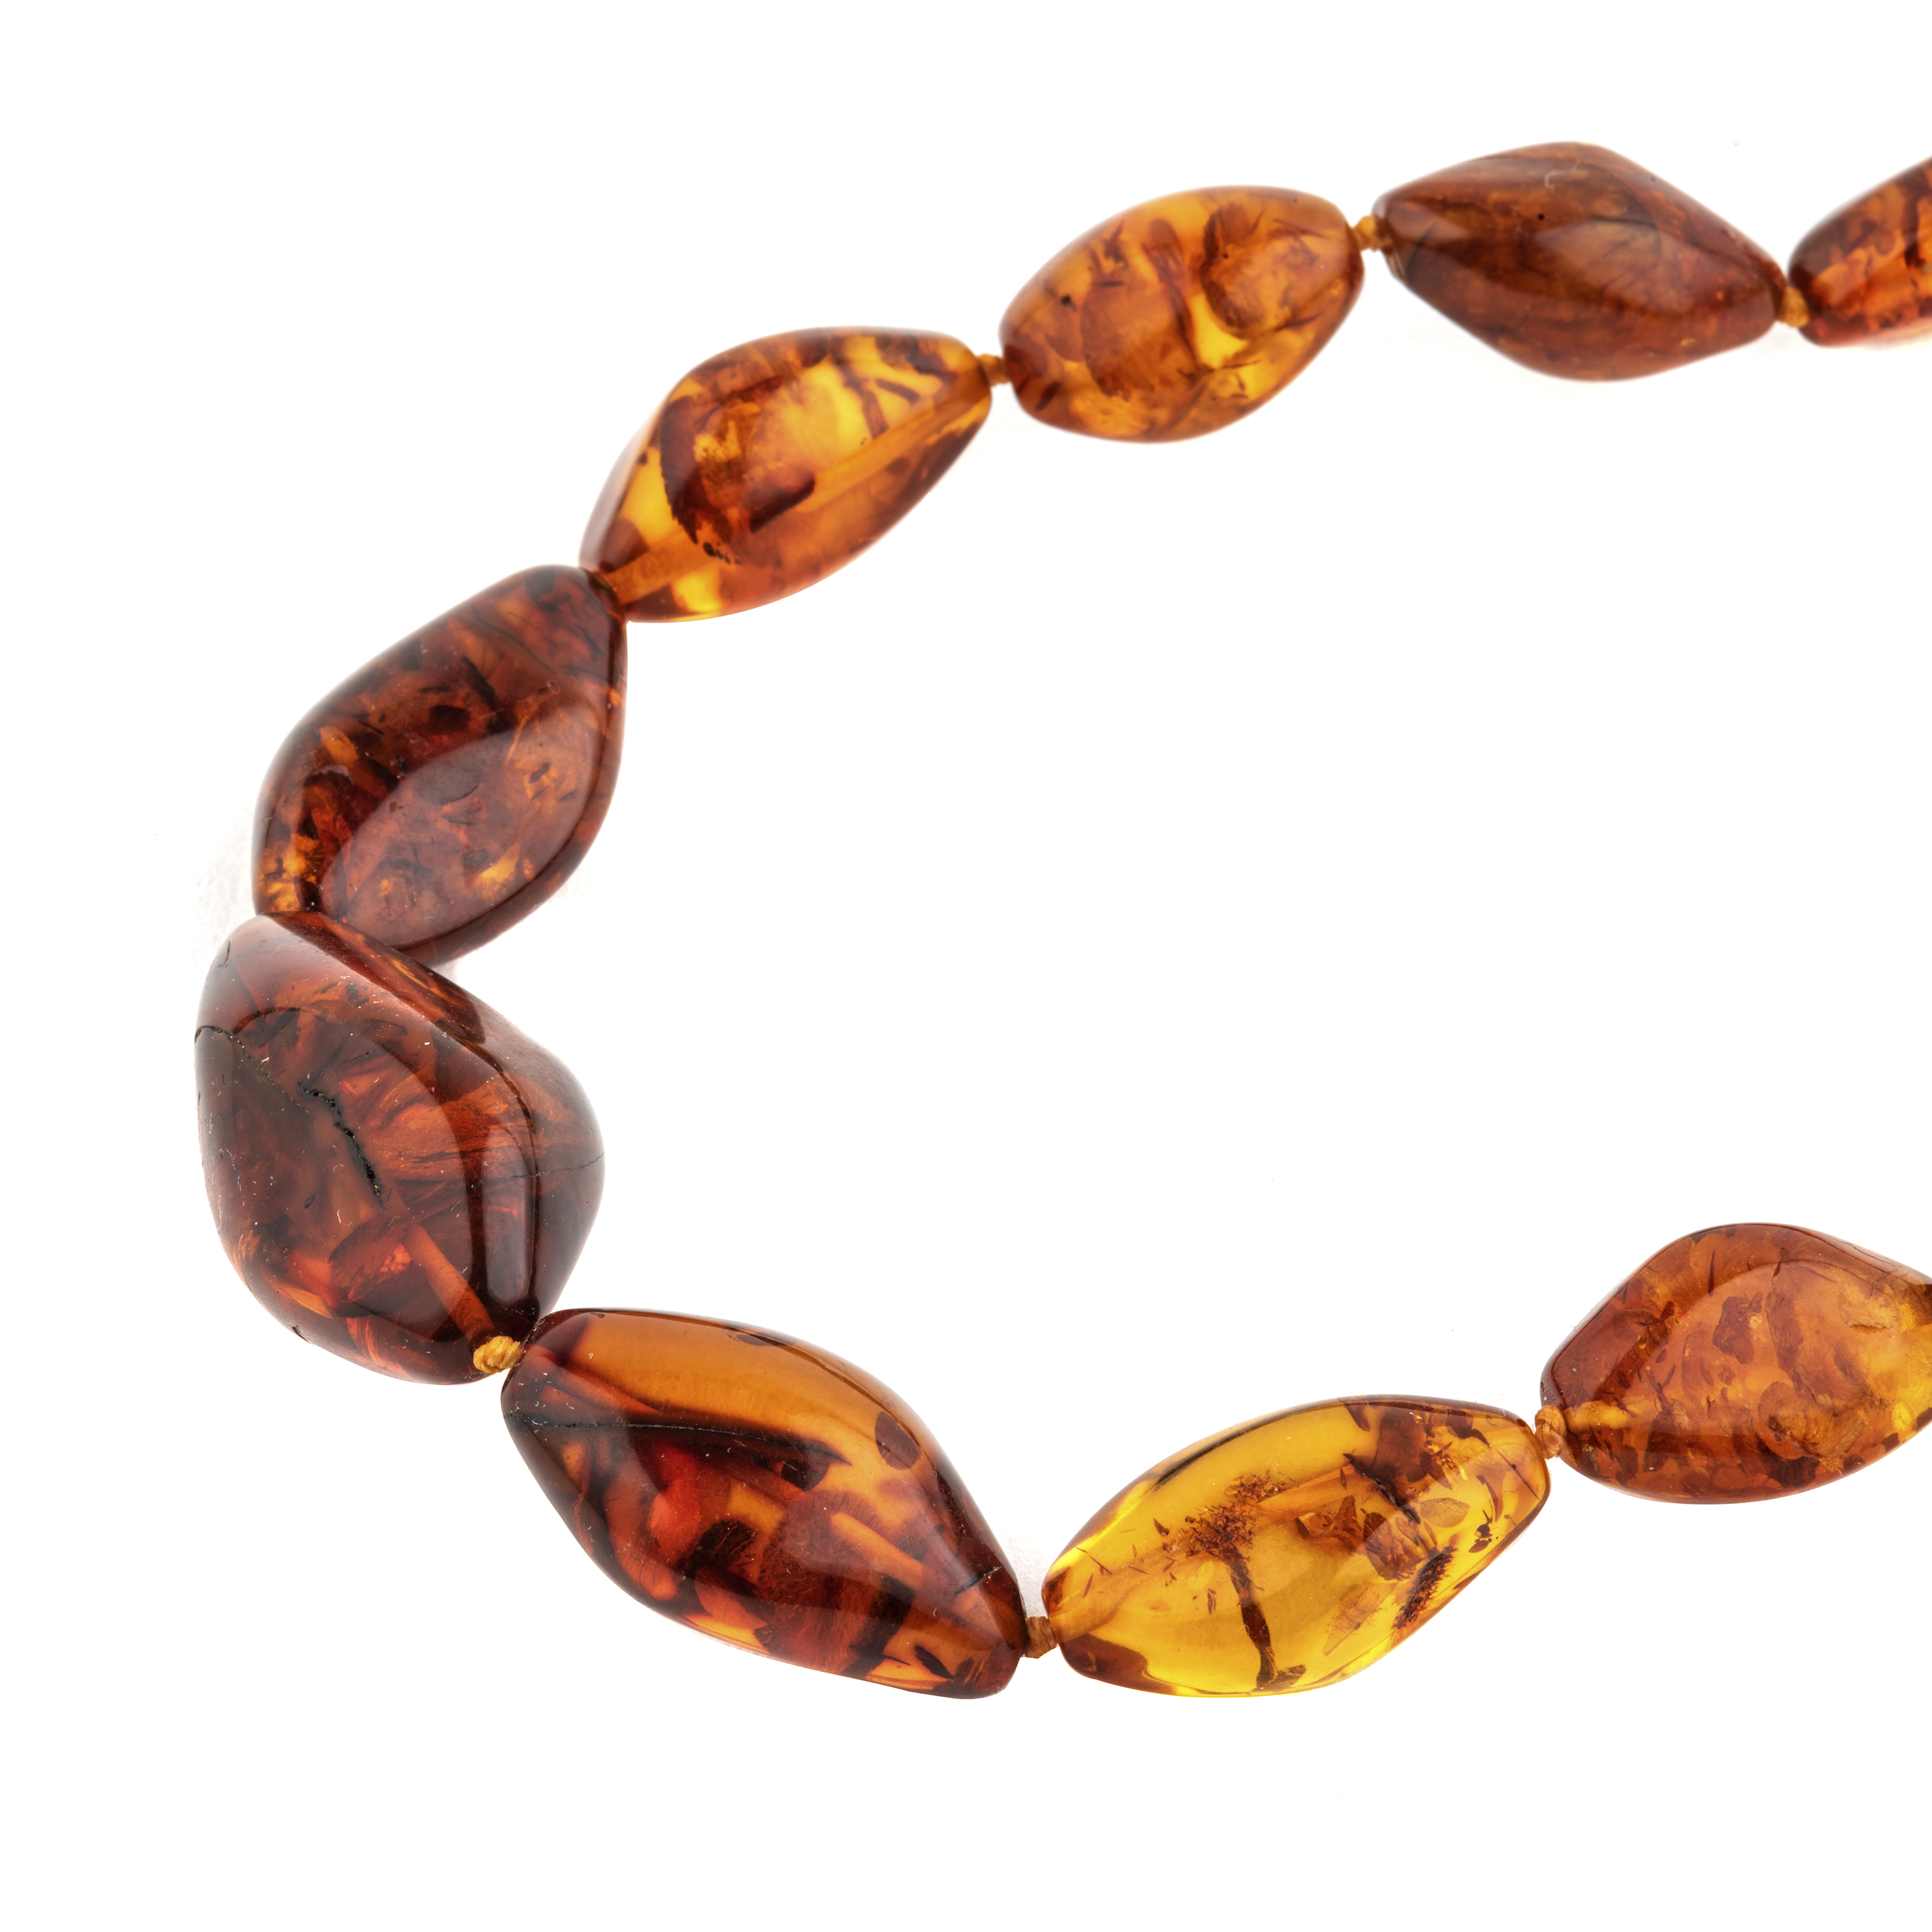 Amber Teething Necklace Made of Baltic Amber and Jadeite.